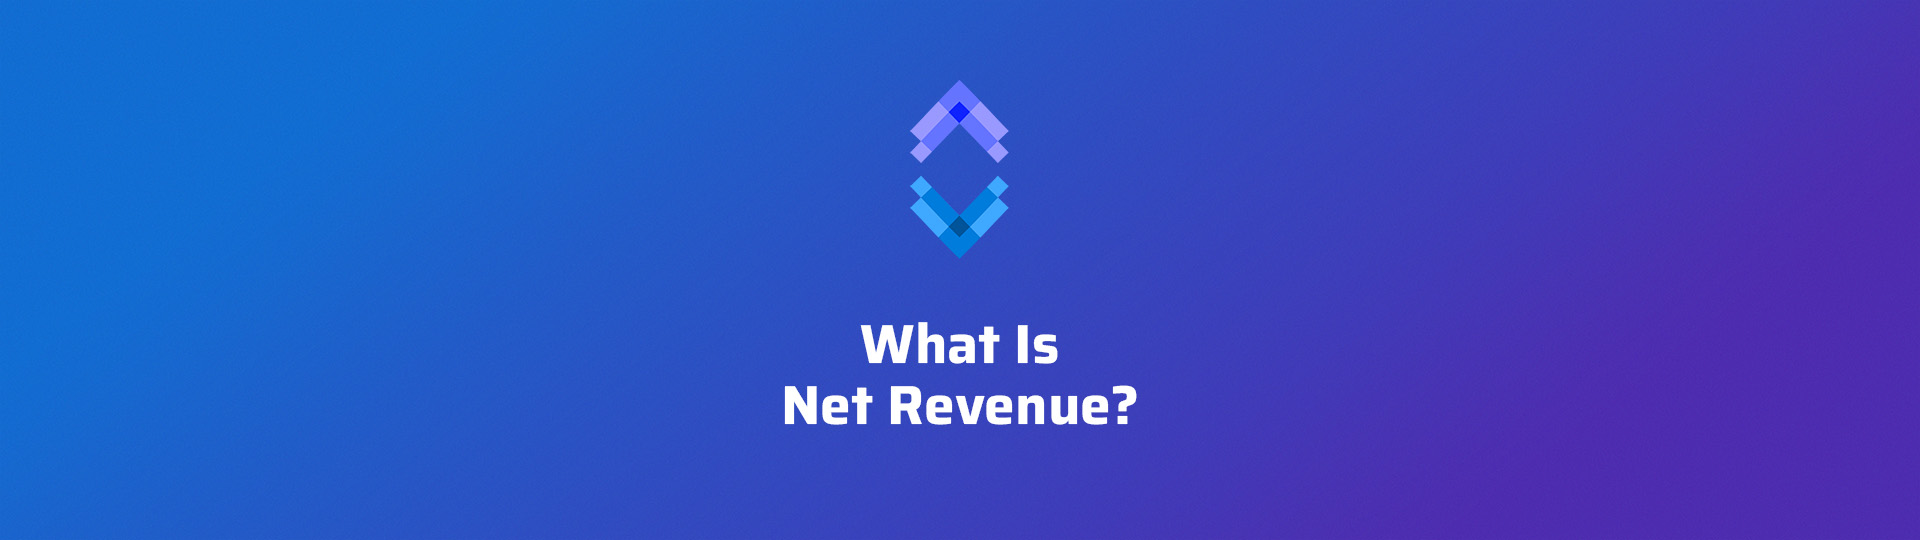 What Is Net Revenue How to Calculate it